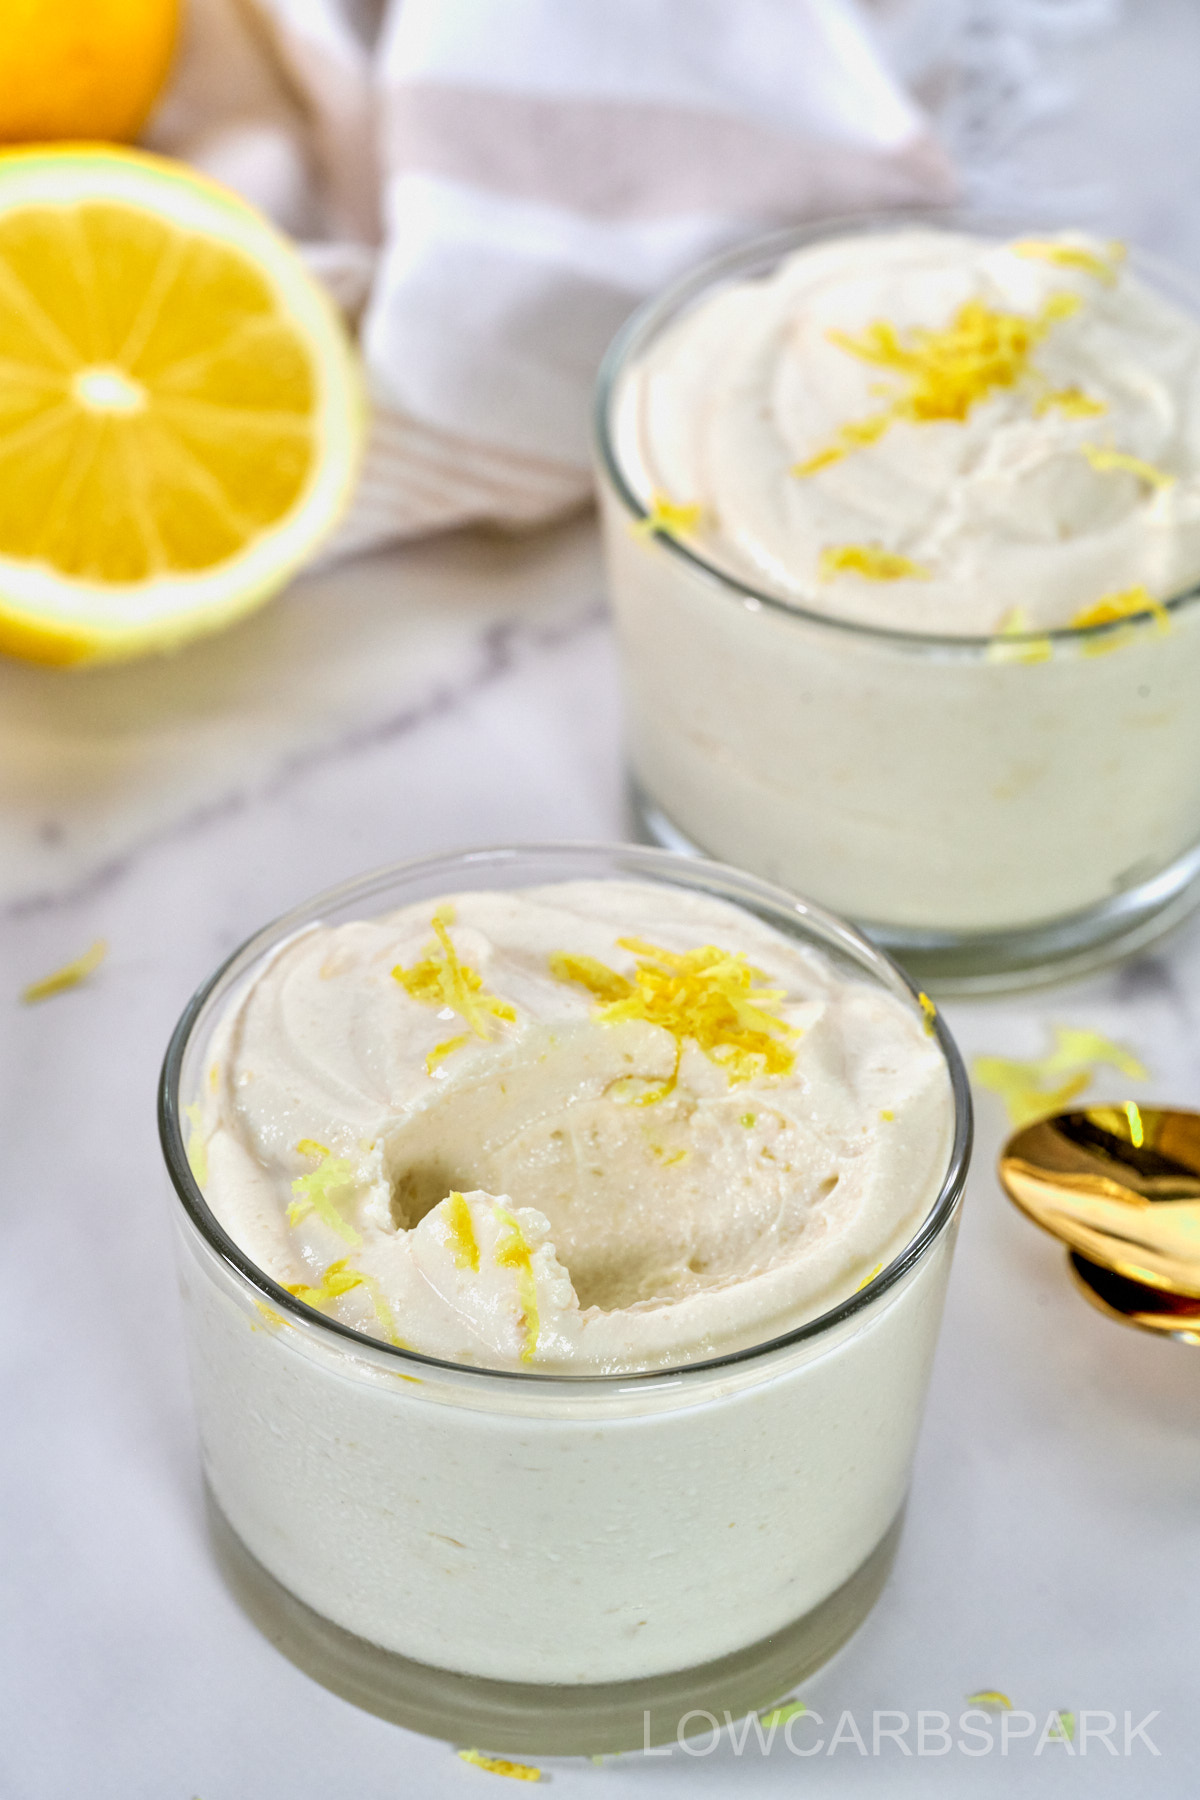 This Cottage Cheese Lemon Mousse is super creamy, refreshing, and loaded with 12 grams of protein. It's a magical low calorie dessert that has quickly become my favorite.